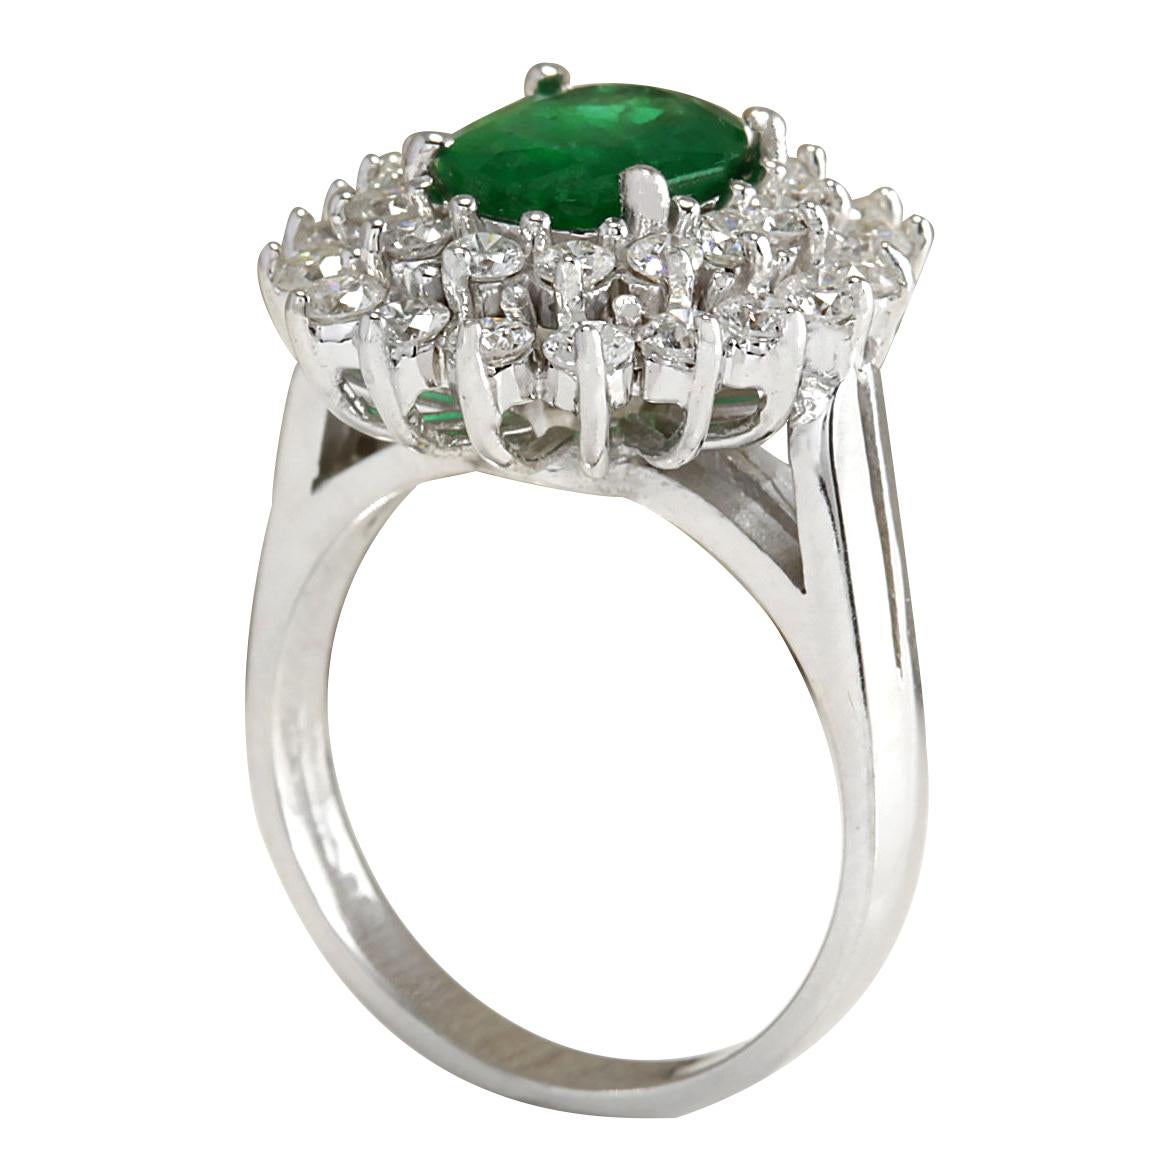 2.75 Carat Natural Emerald 18 Karat White Gold Diamond Ring In New Condition For Sale In Los Angeles, CA